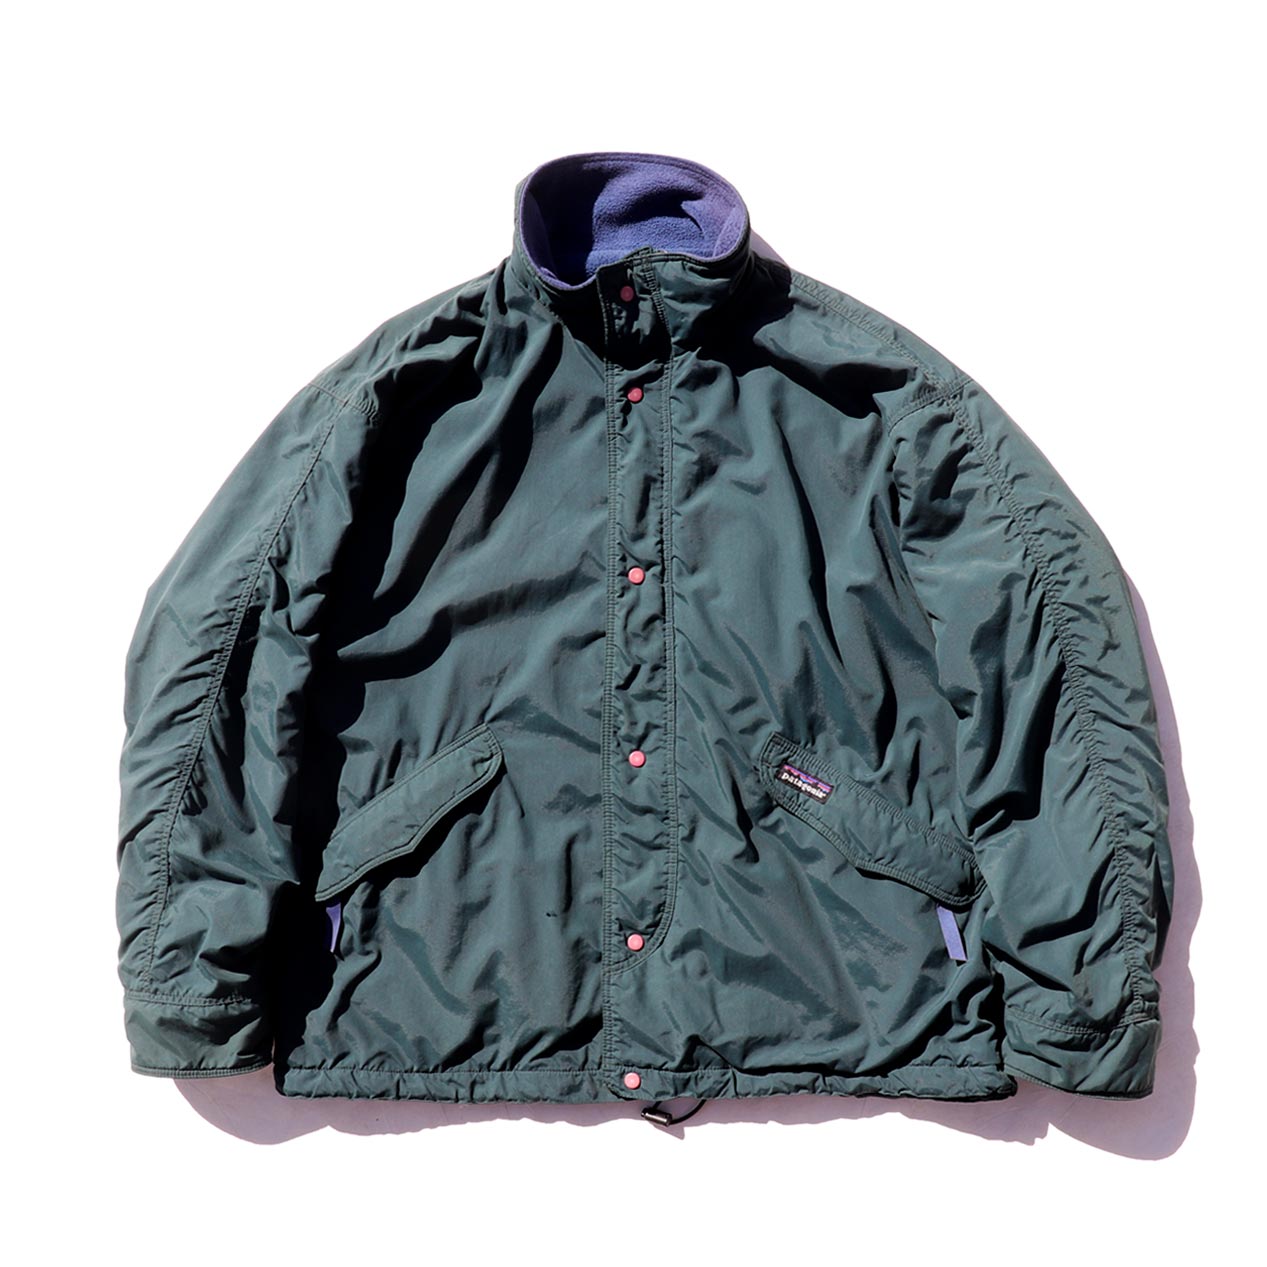 POST JUNK / '93 PATAGONIA Softshell Capilene Jacket Made In U.S.A. [M]